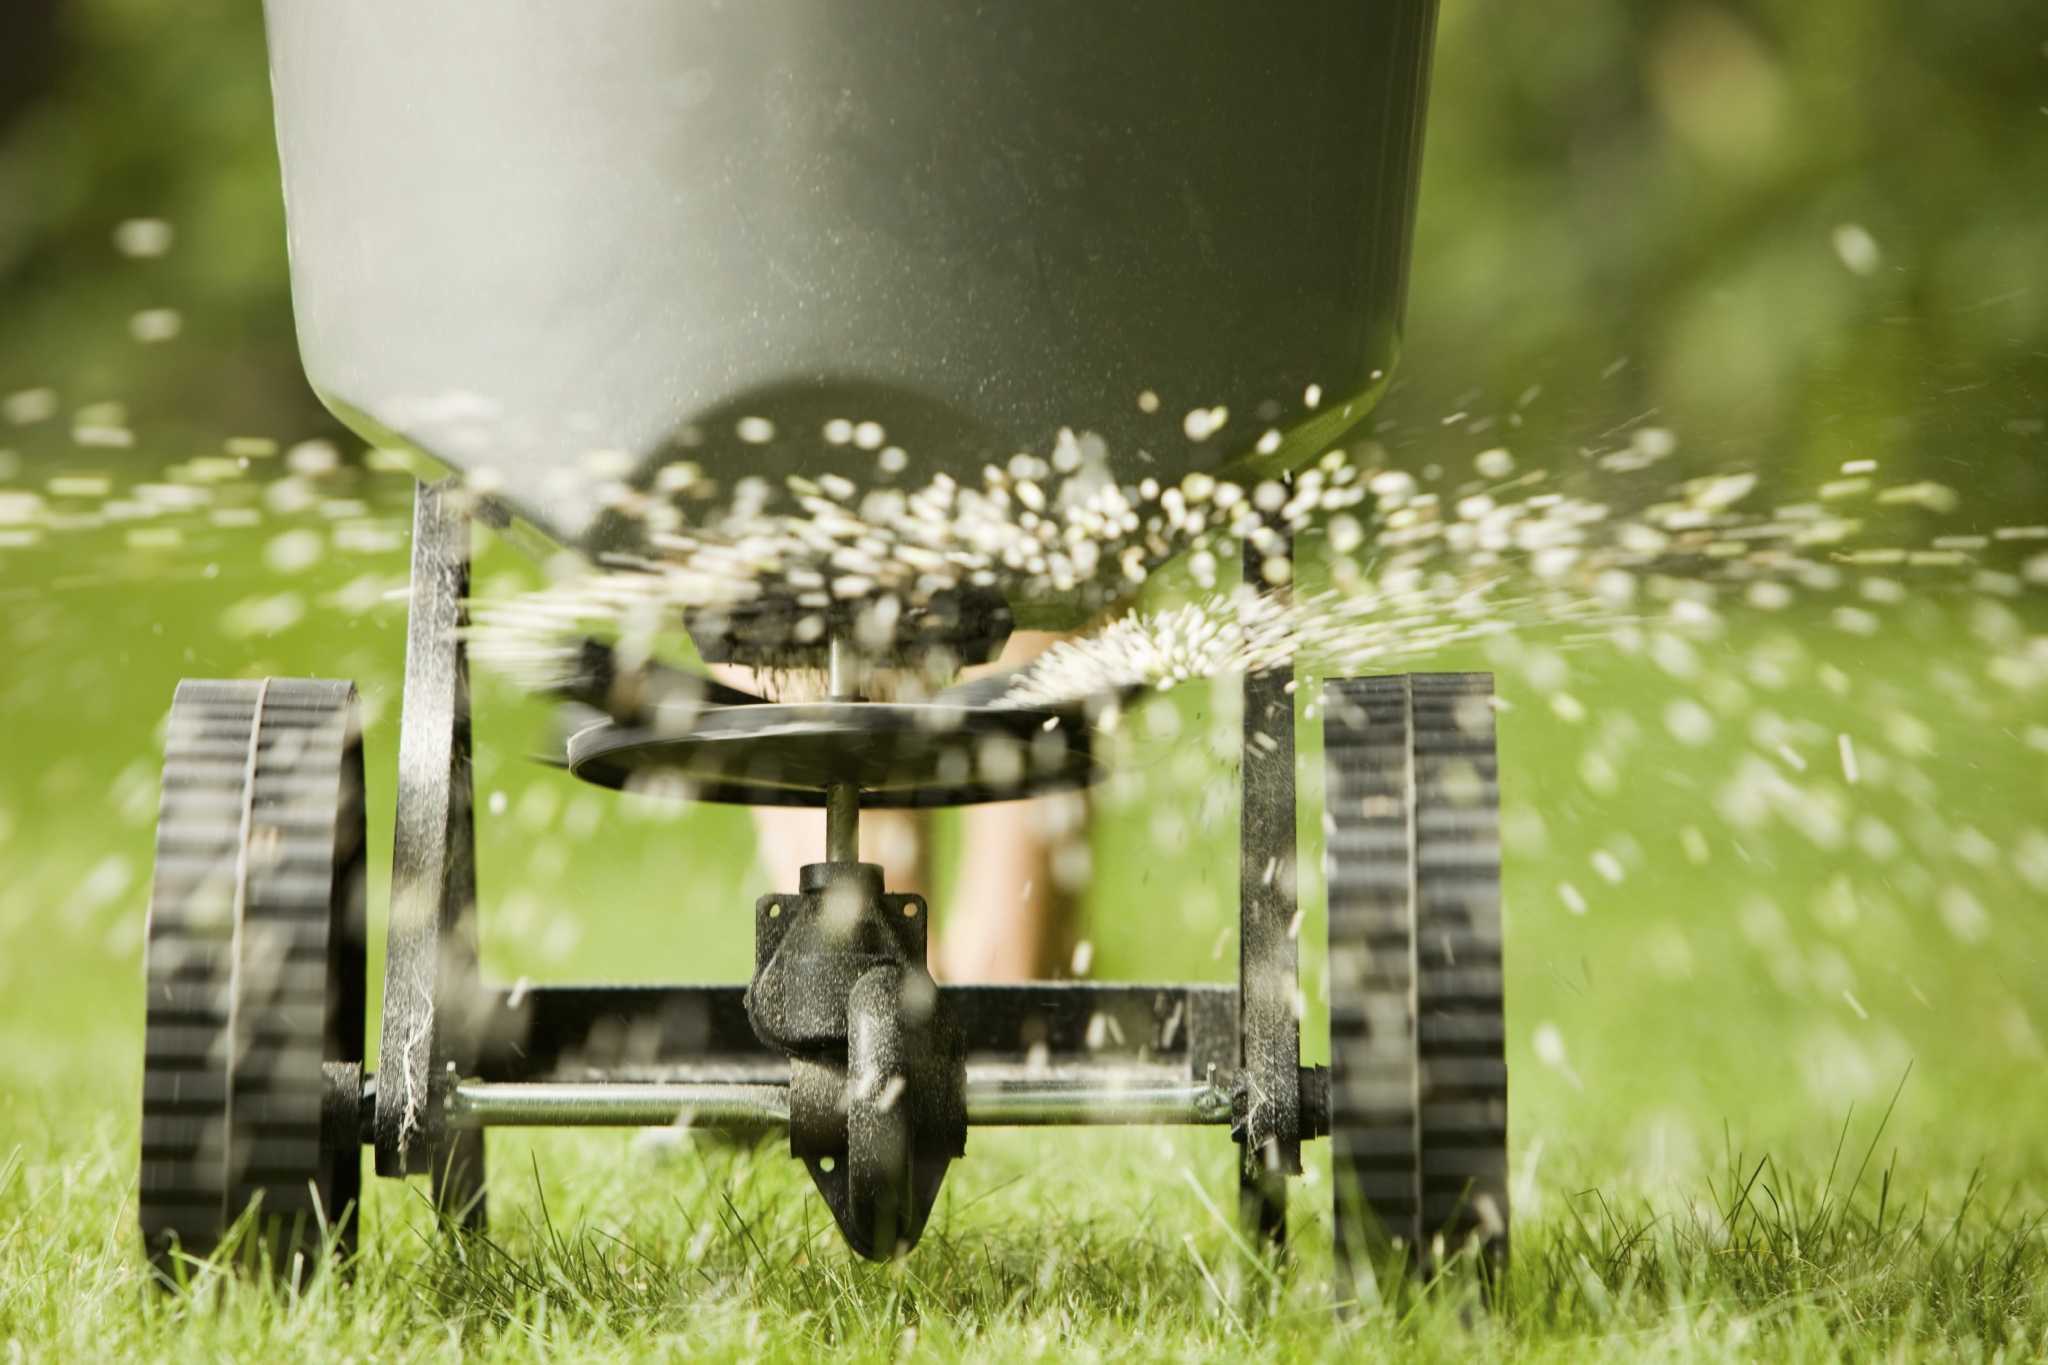 FERTILIZATION AND WEED CONTROL  Remington Landscaping, Lawn Care and  Fertilizing